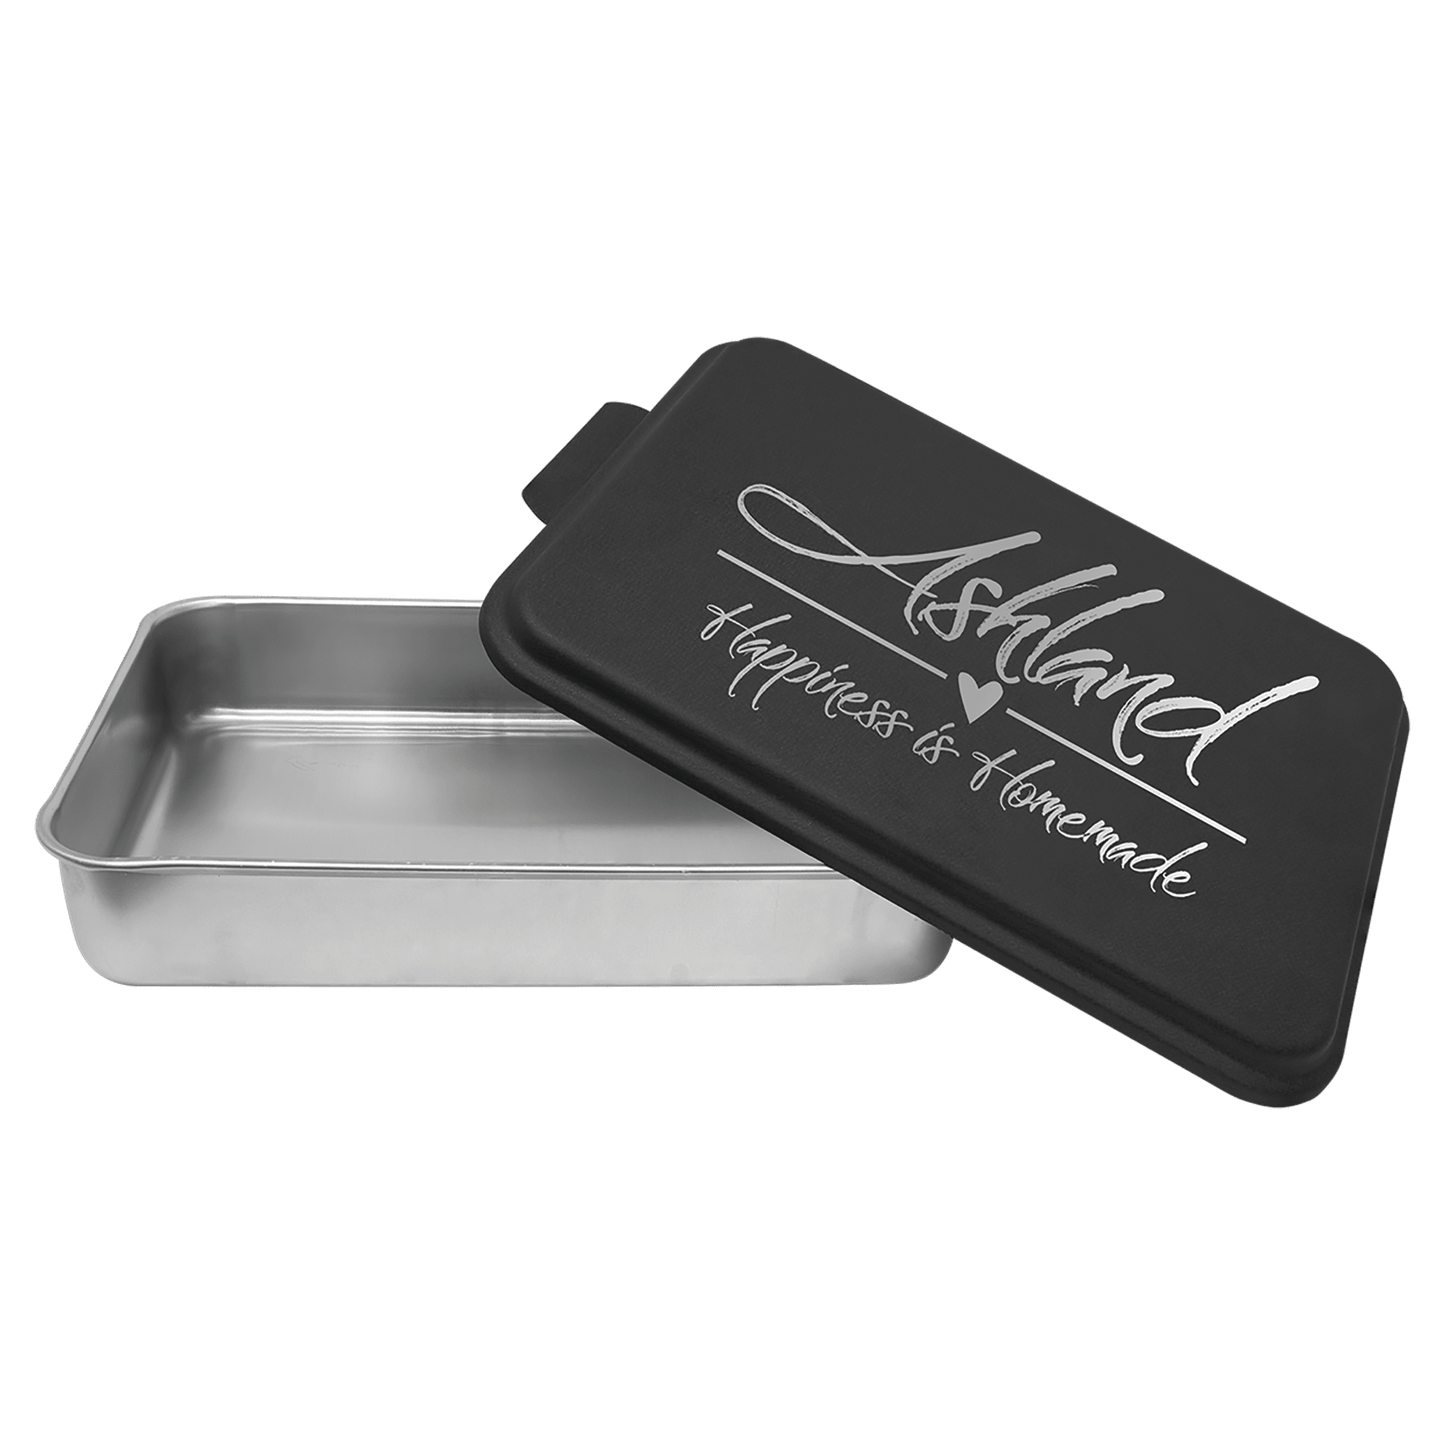 Custom Engraved Cake Pan with Lid | Baker's Gifts | Mother's Day Gifts | Gifts for Mom